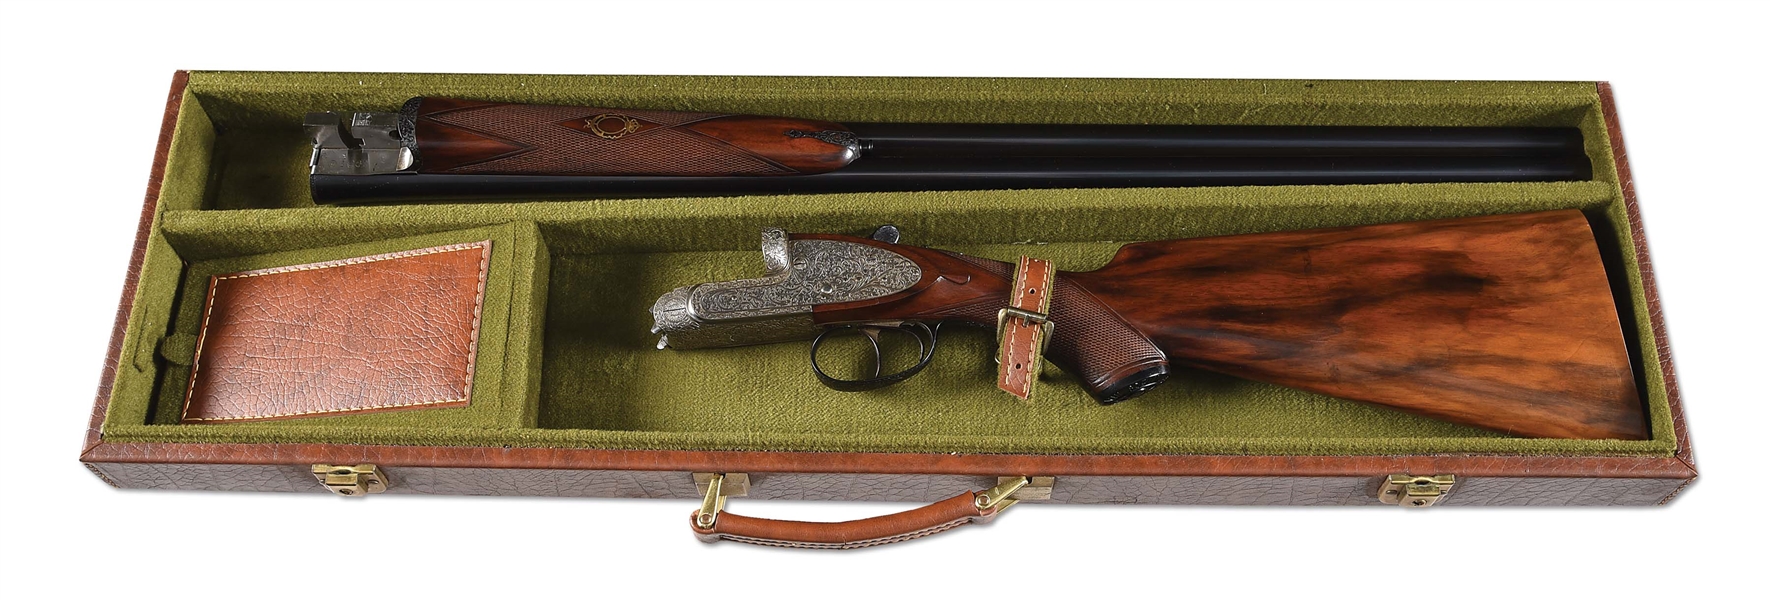 (M) ENGRAVED FRANCHI MONTE CARLO SIDE BY SIDE SHOTGUN WITH CASE. 